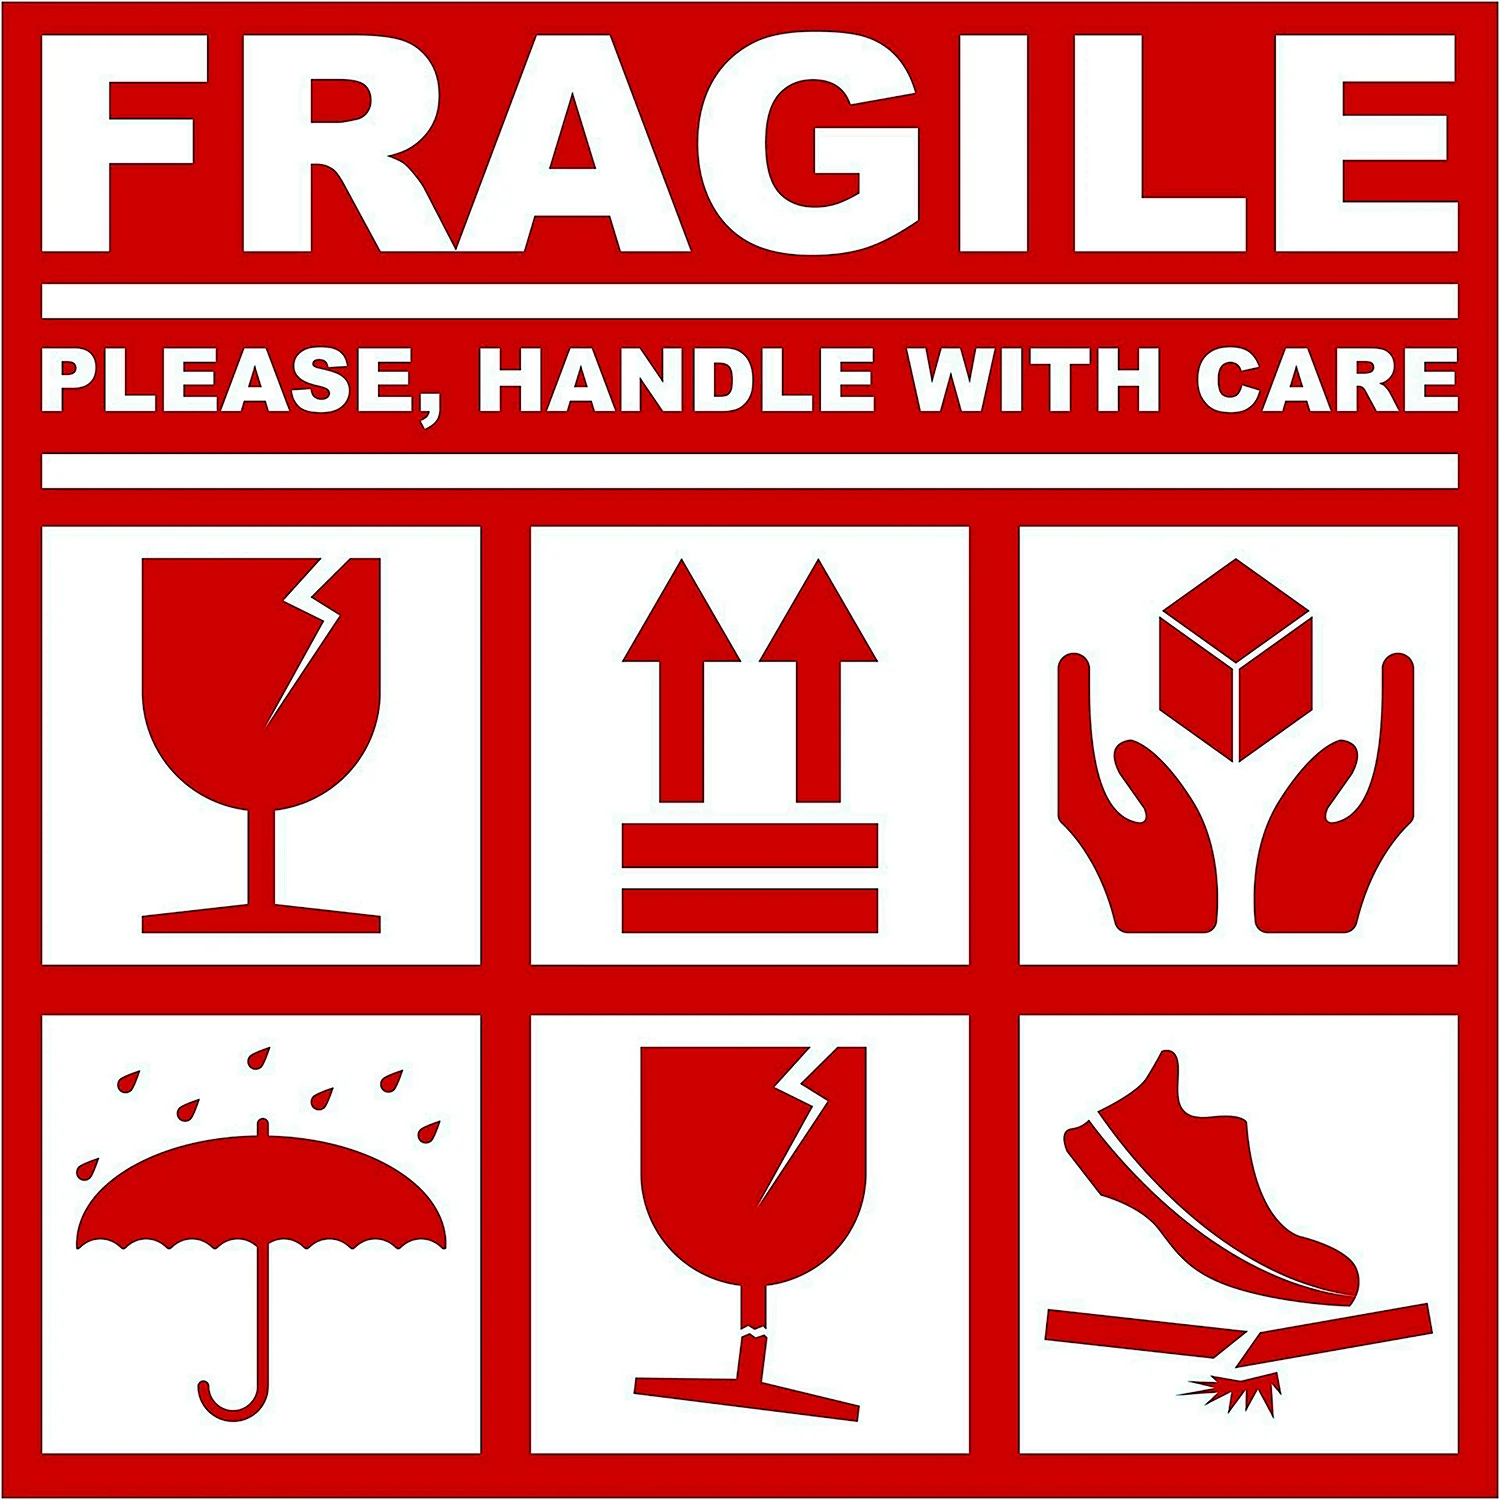 Fragile with Care